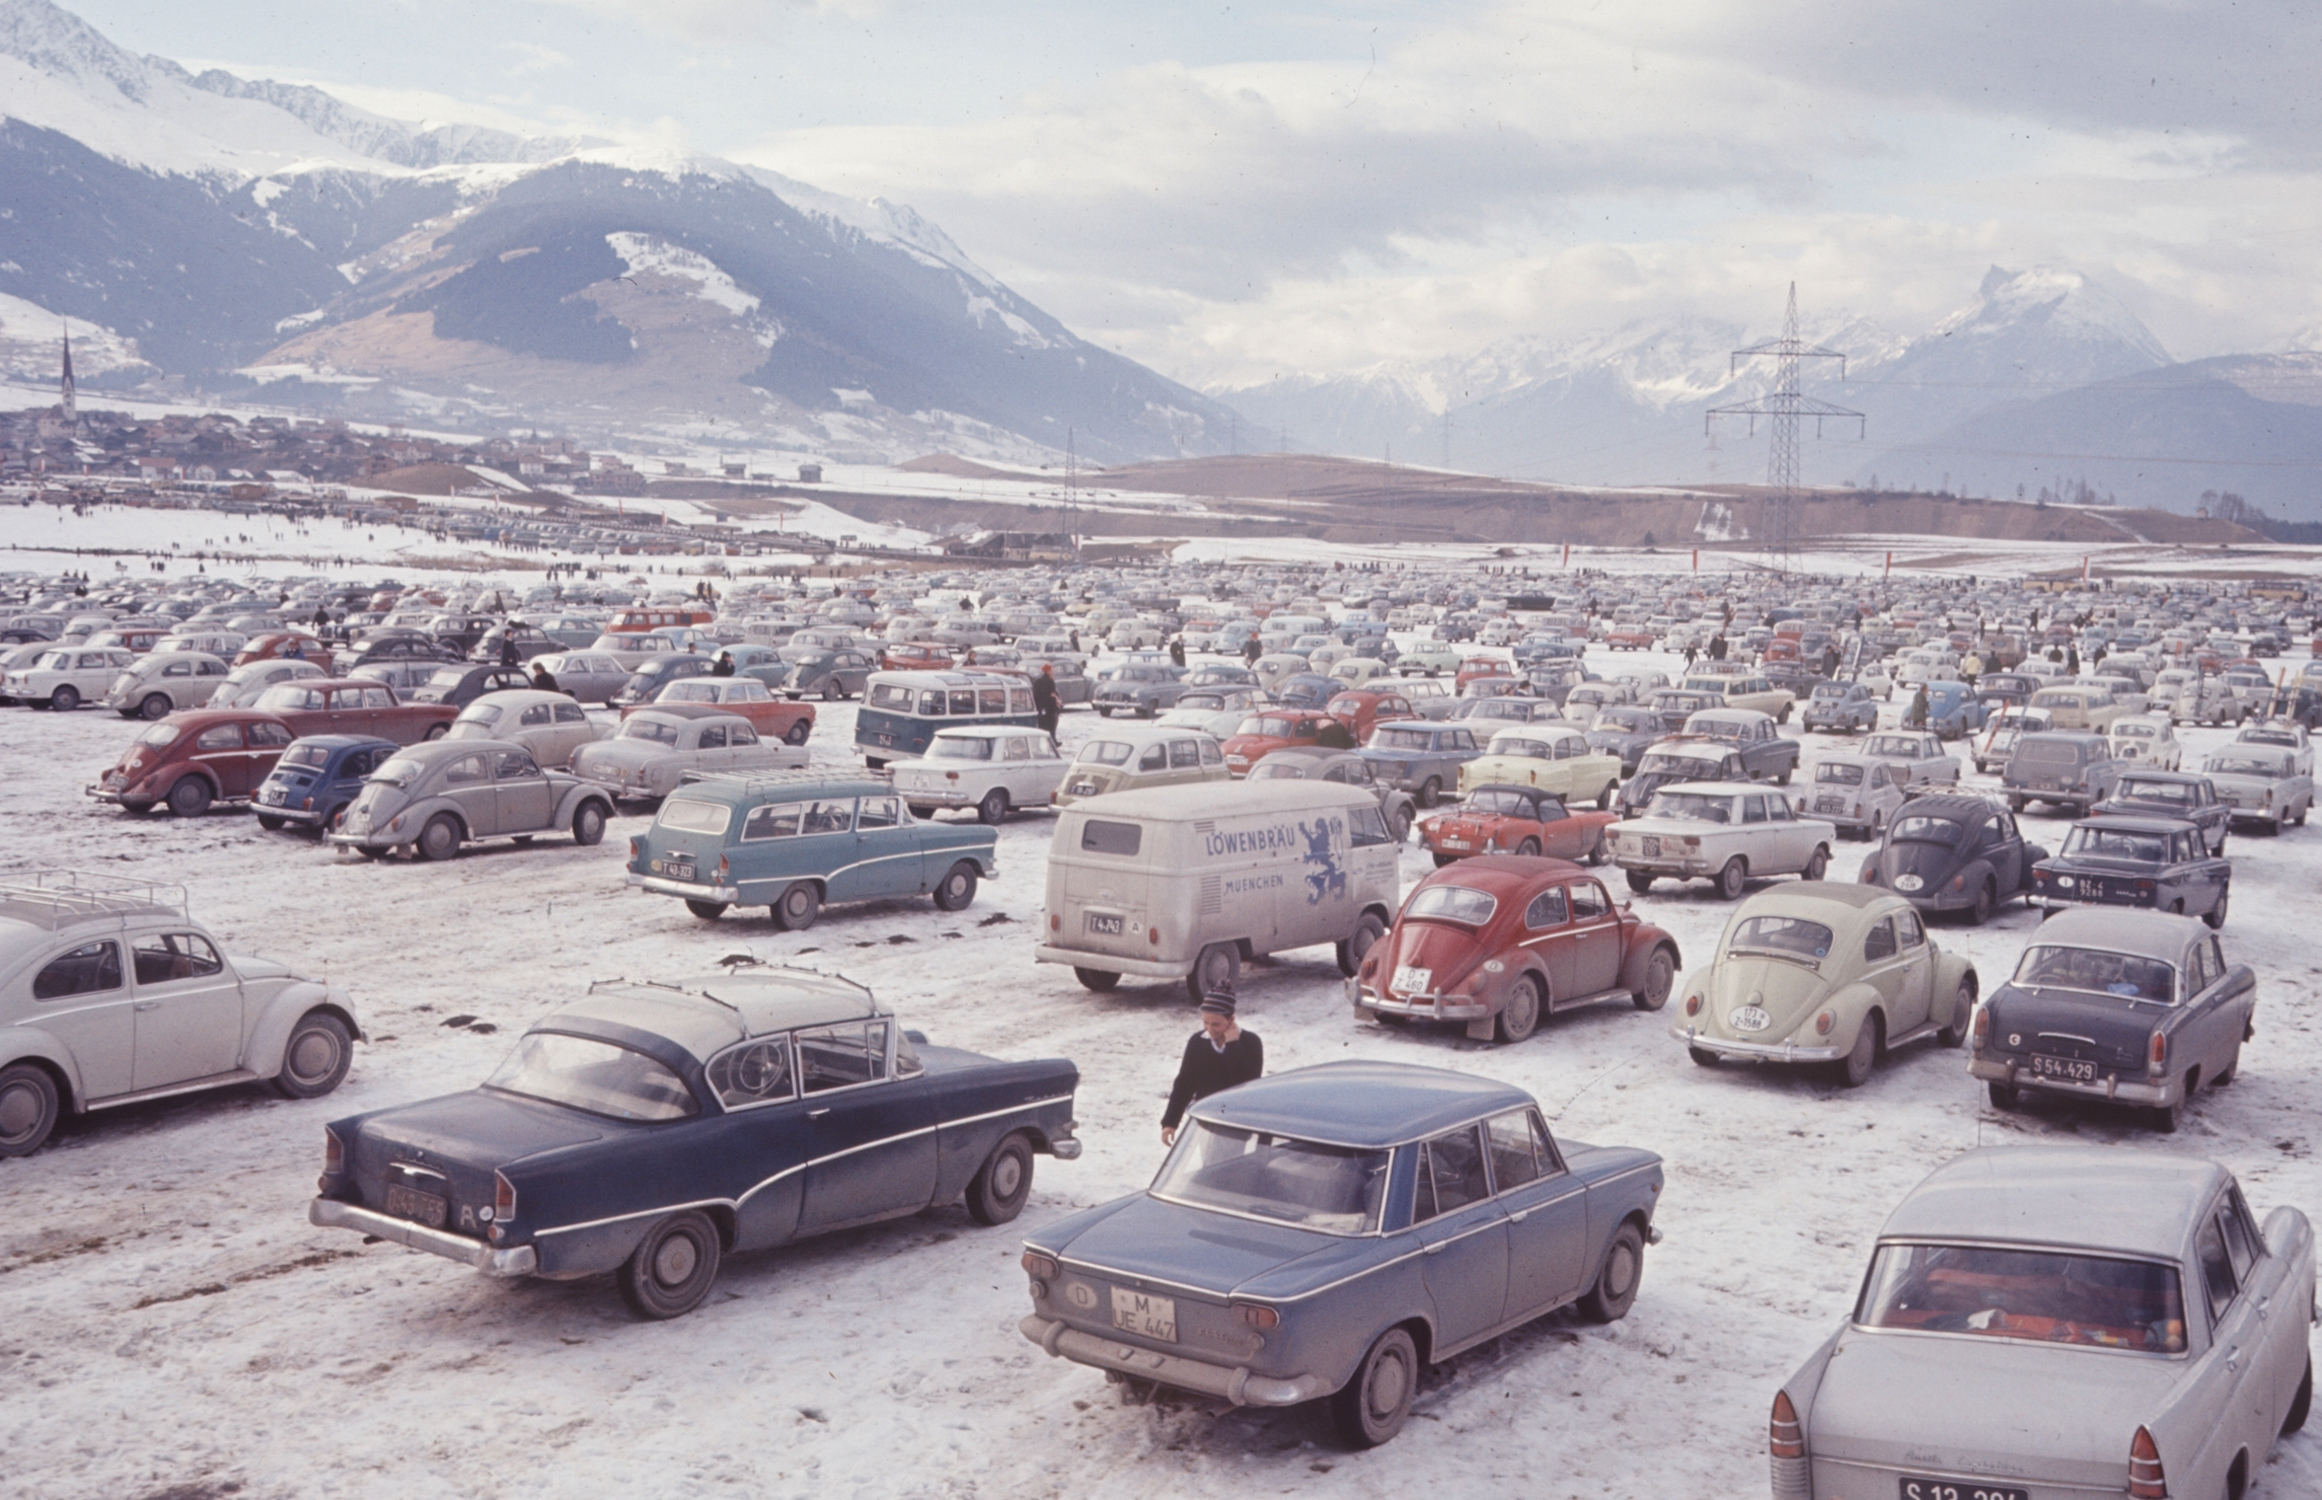 Cars parked at the 1964 Innsbruck Winter Olympics.